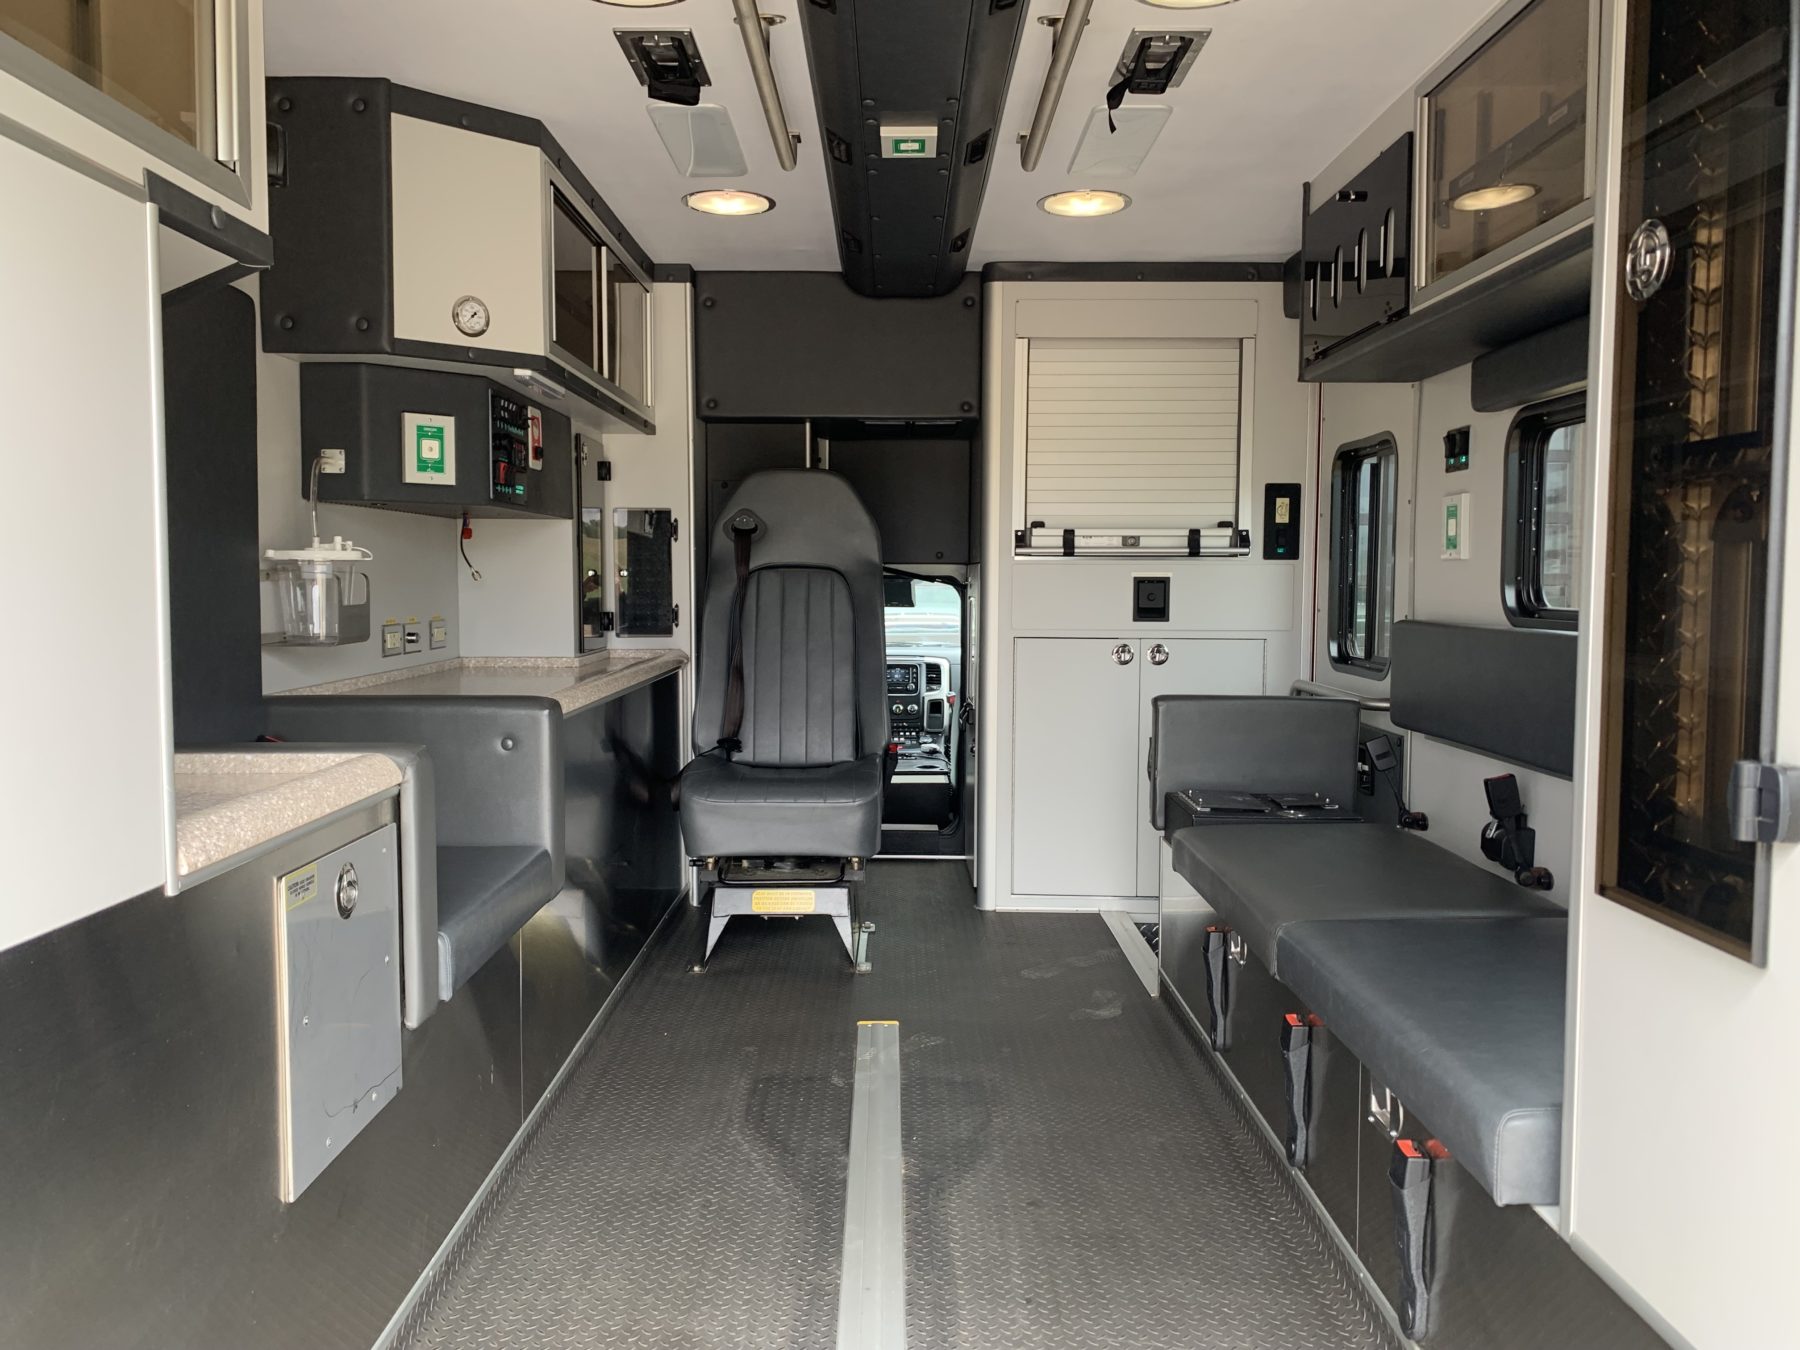 2017 Ram 4500 4x4 Heavy Duty Ambulance For Sale – Picture 2